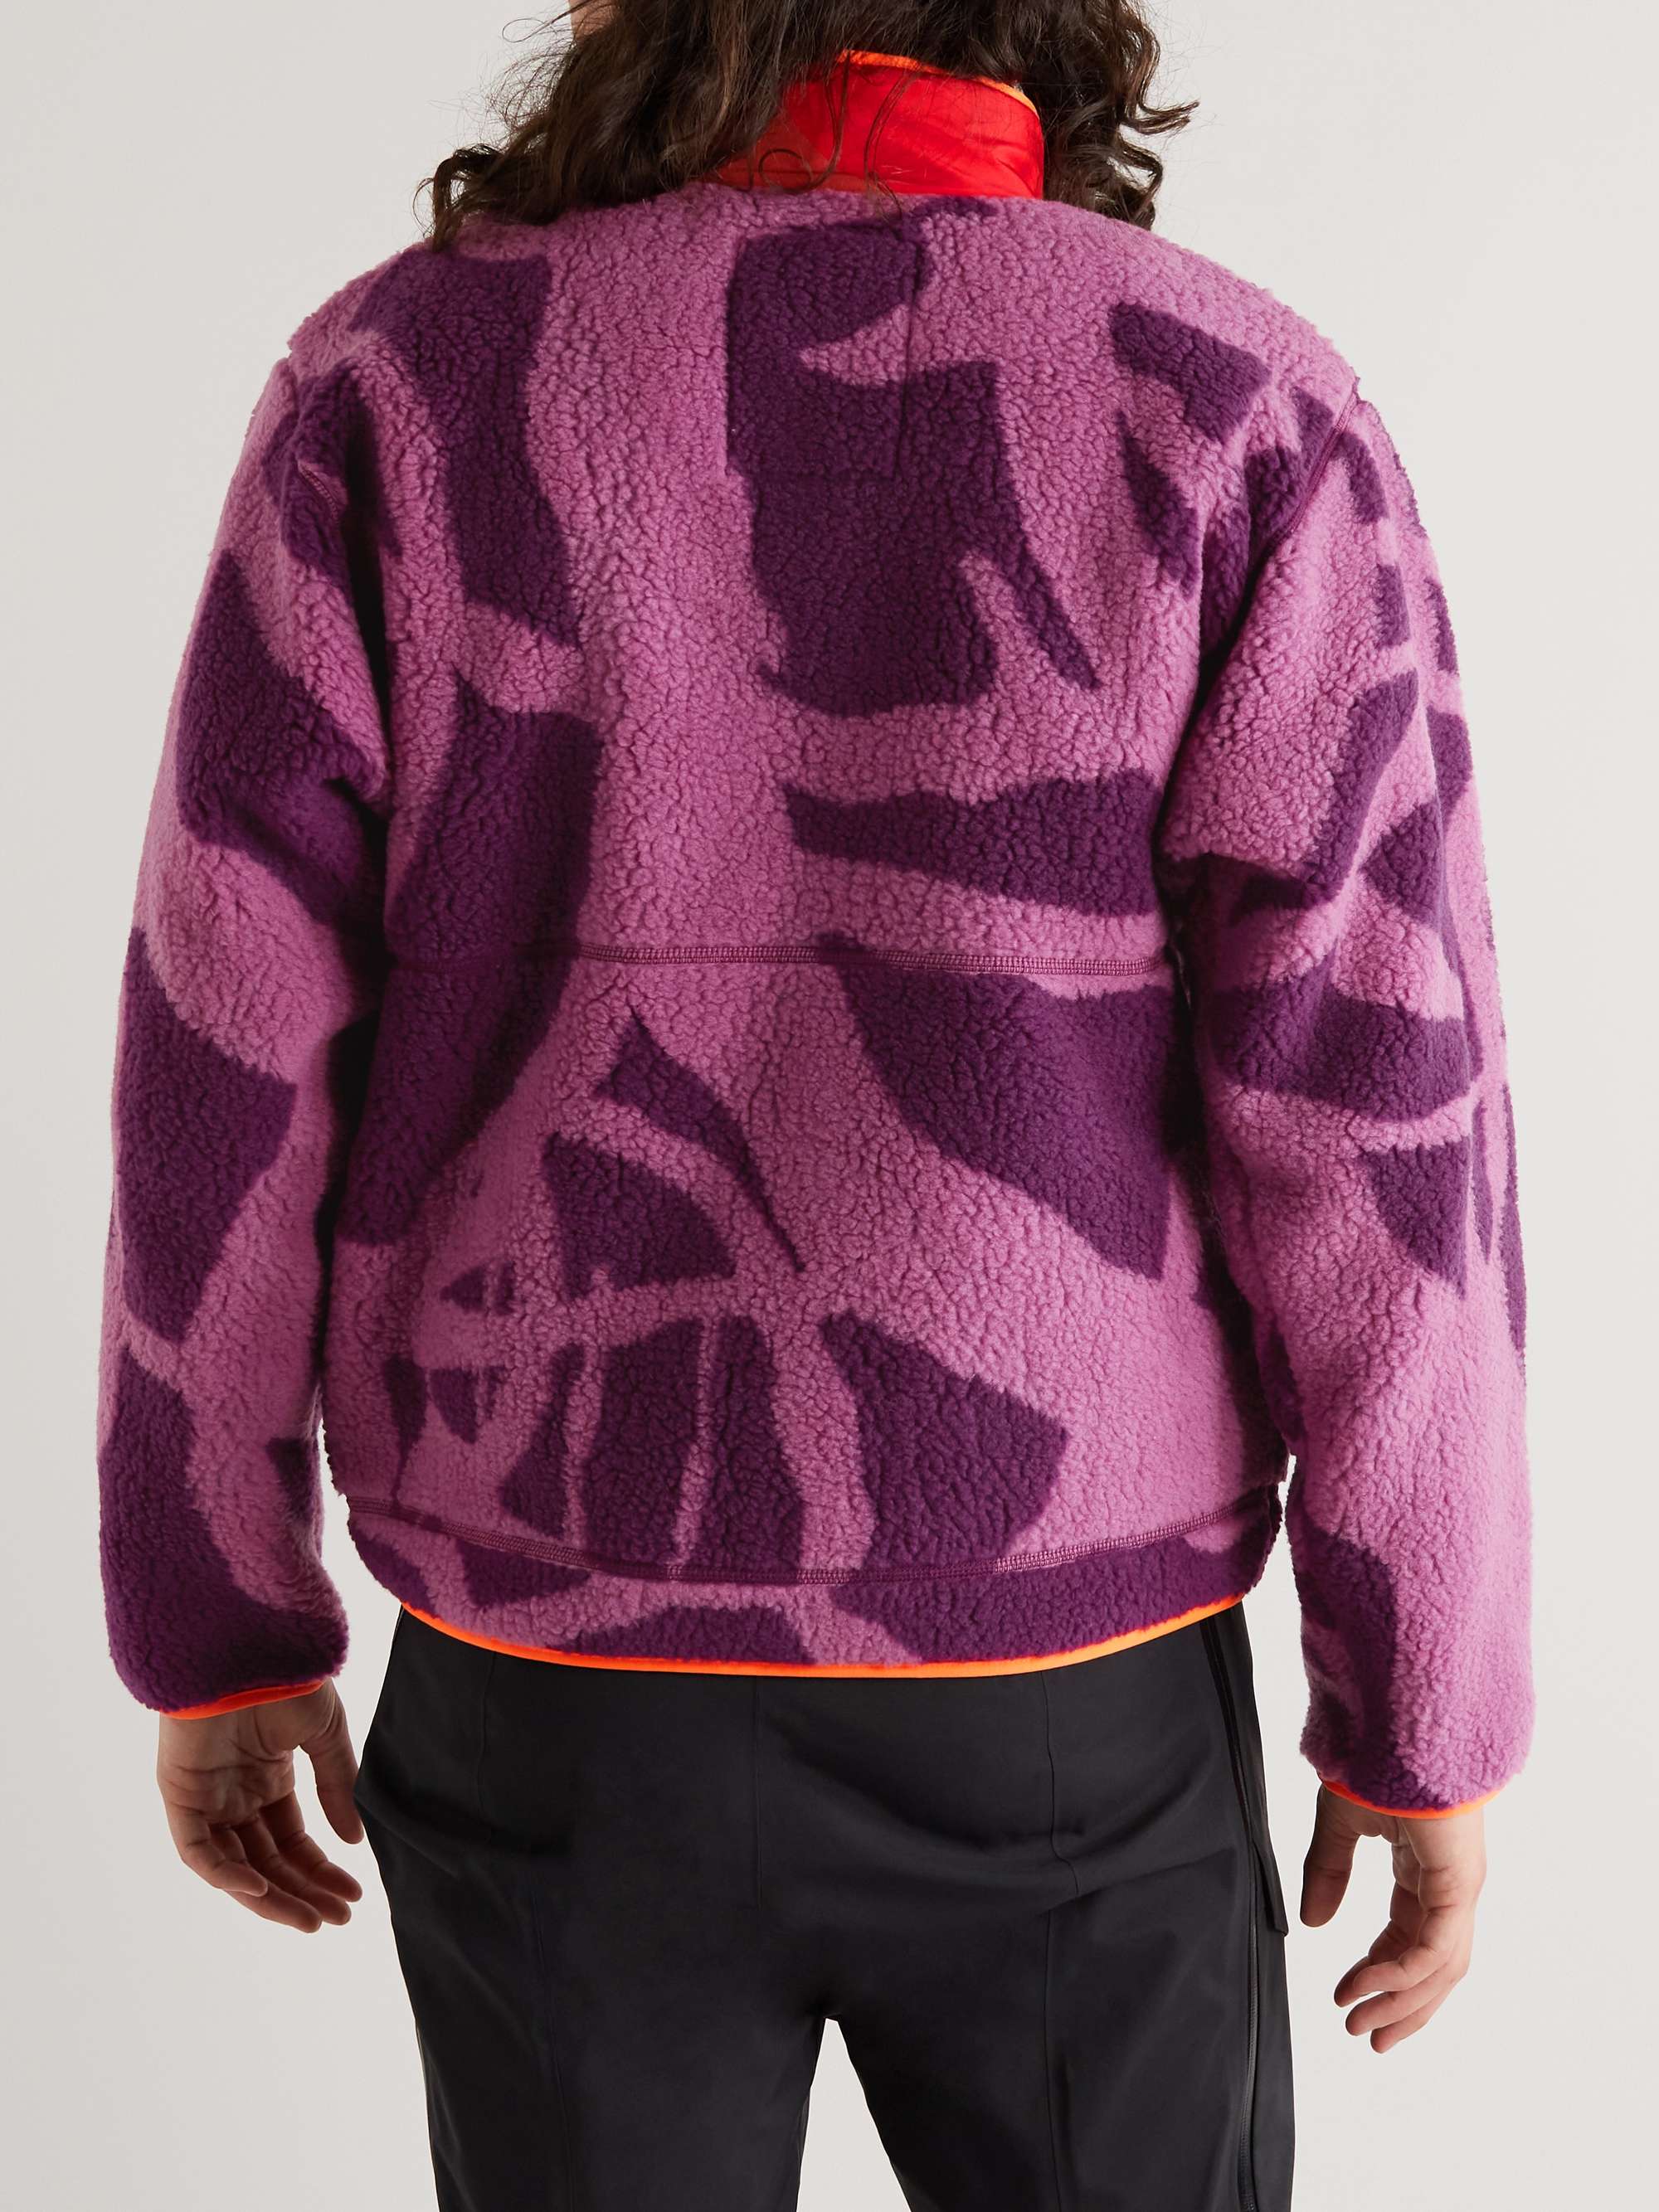 THE NORTH FACE + KAWS XX Freeride Shell-Trimmed Printed Fleece Jacket